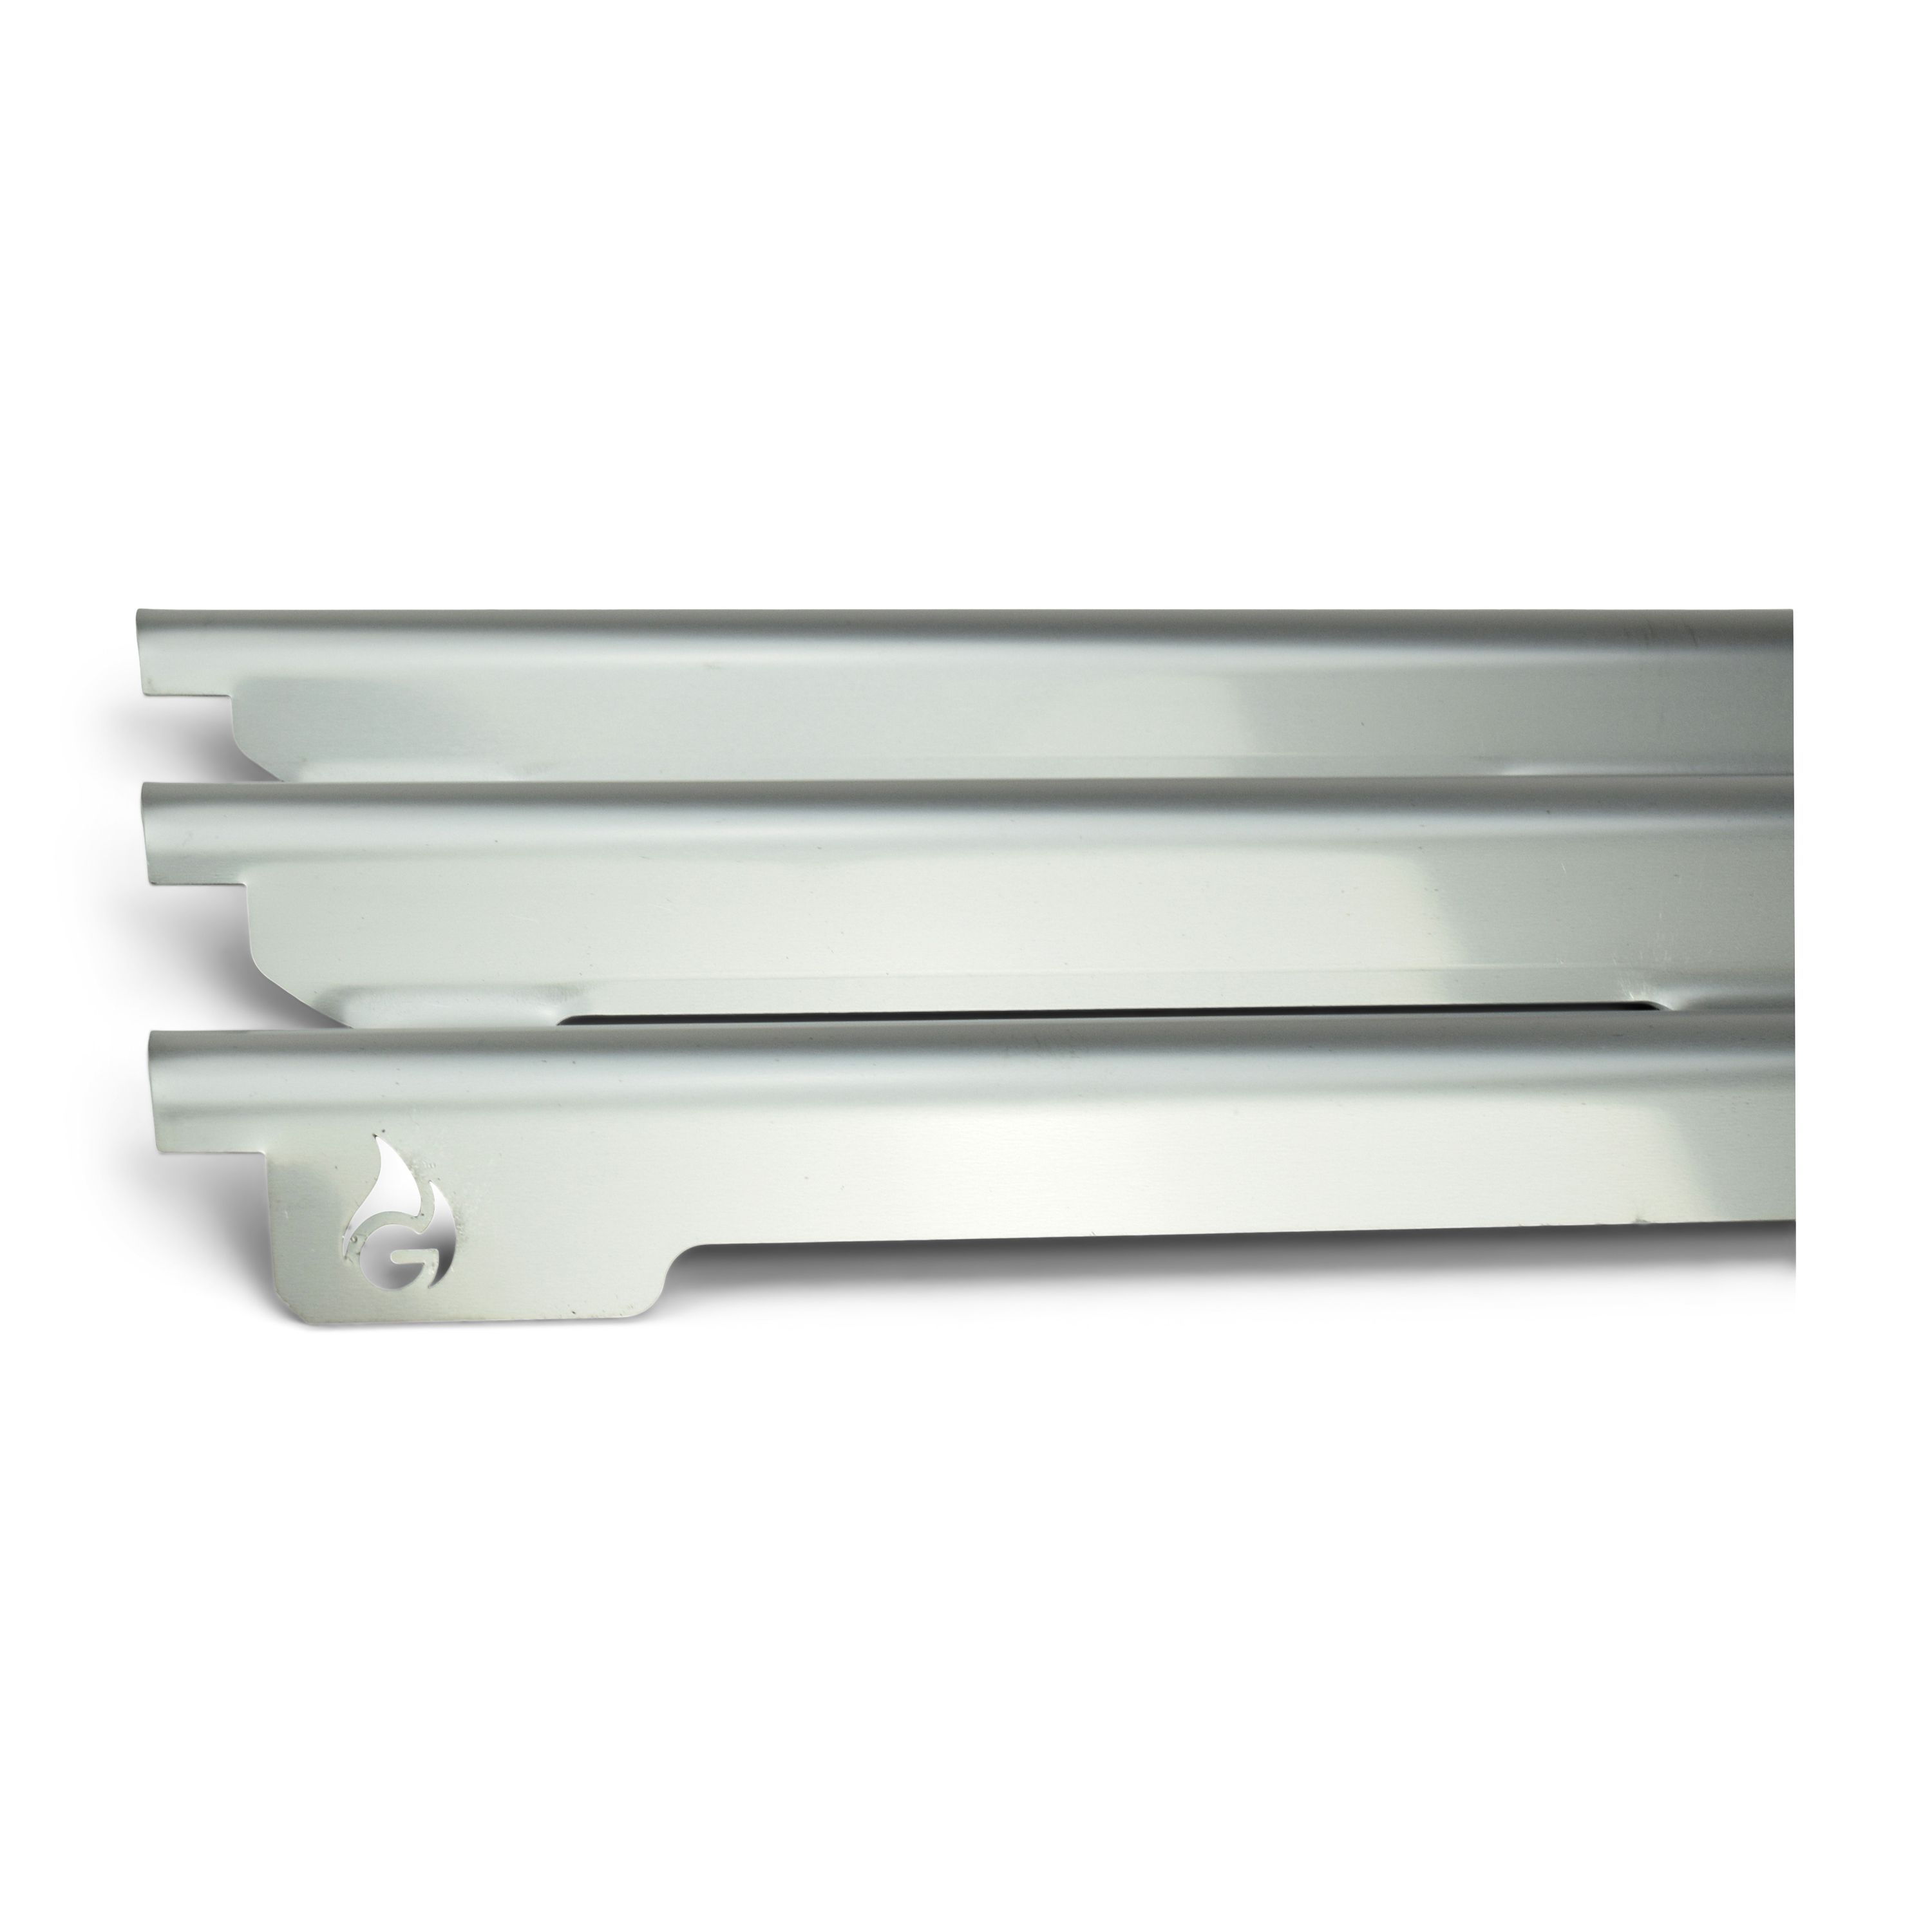 Stainless steel aroma rail for Broil King Burner cover for Imperial and Regal